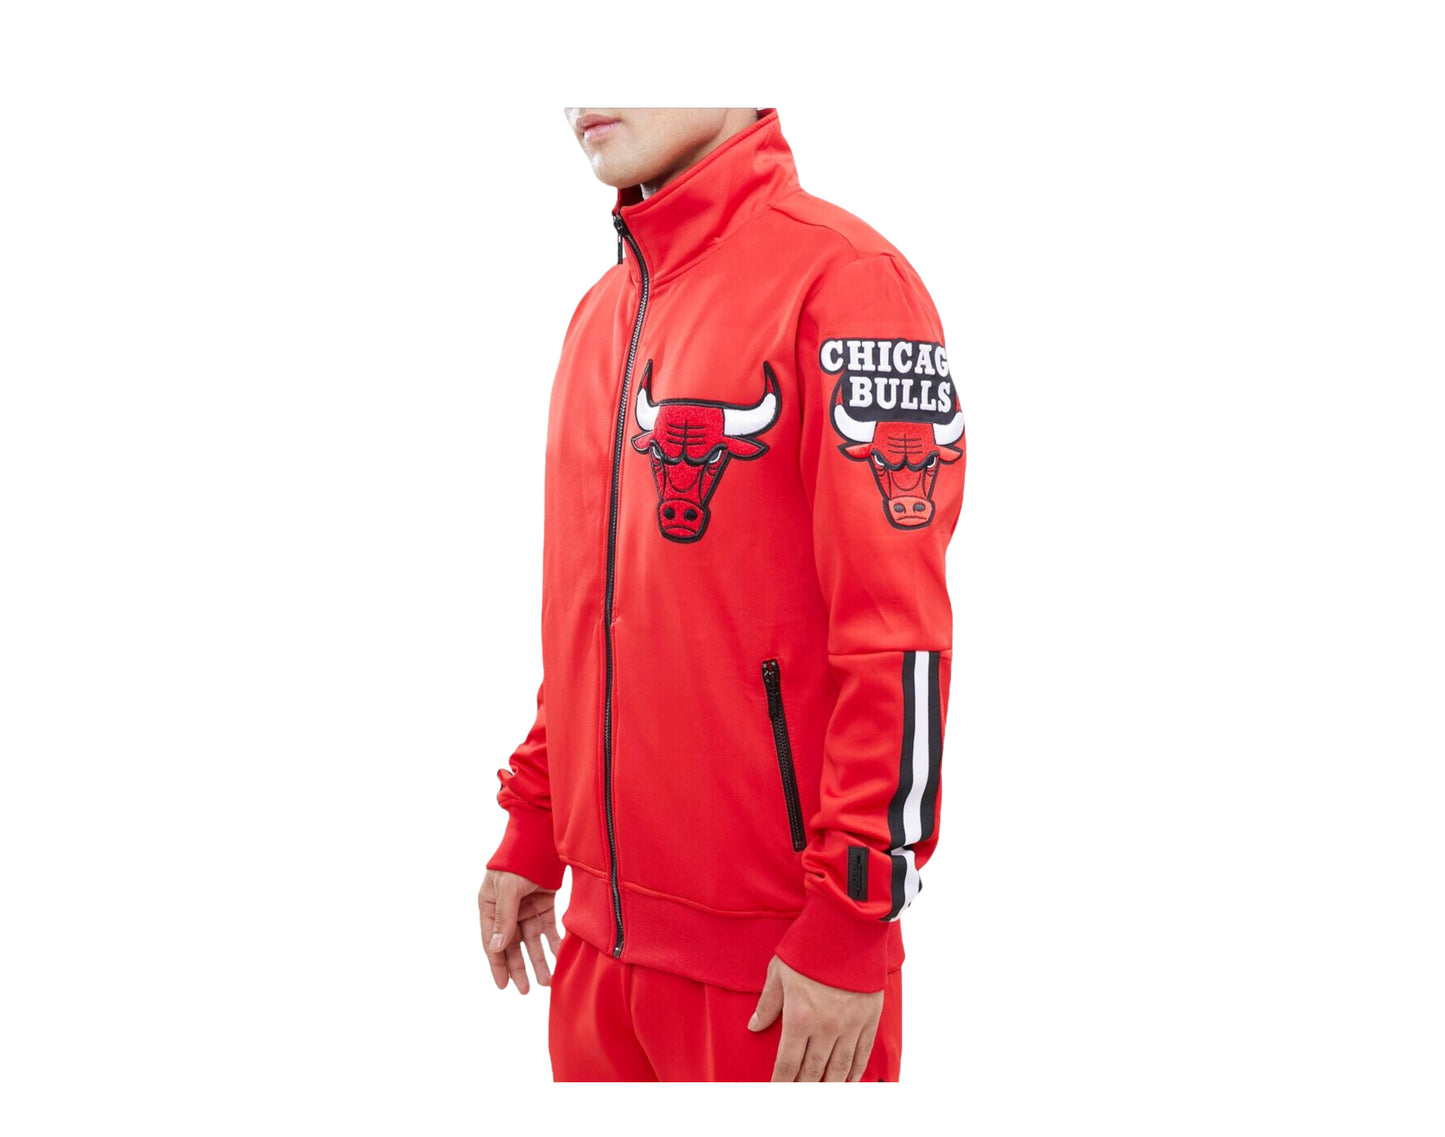 Mitchell & Ness NBA CHICAGO BULLS AUTHENTIC WARM UP JACKET - Club wear -  red 